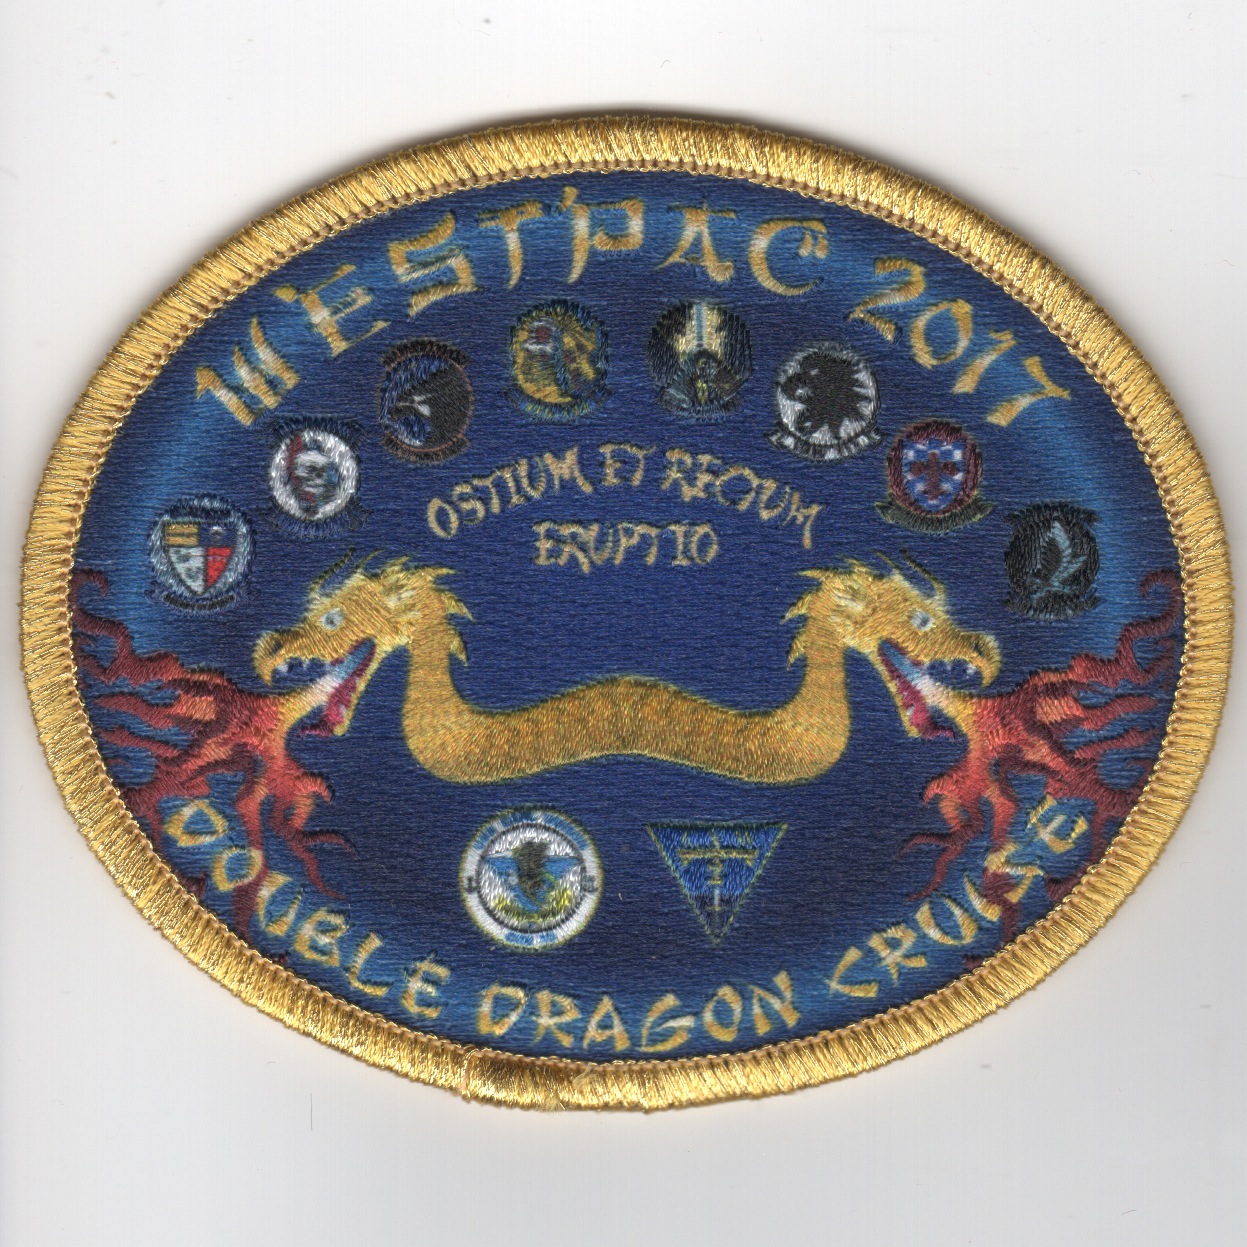 VFA-192 2017 'Double Dragon' Cruise Patch